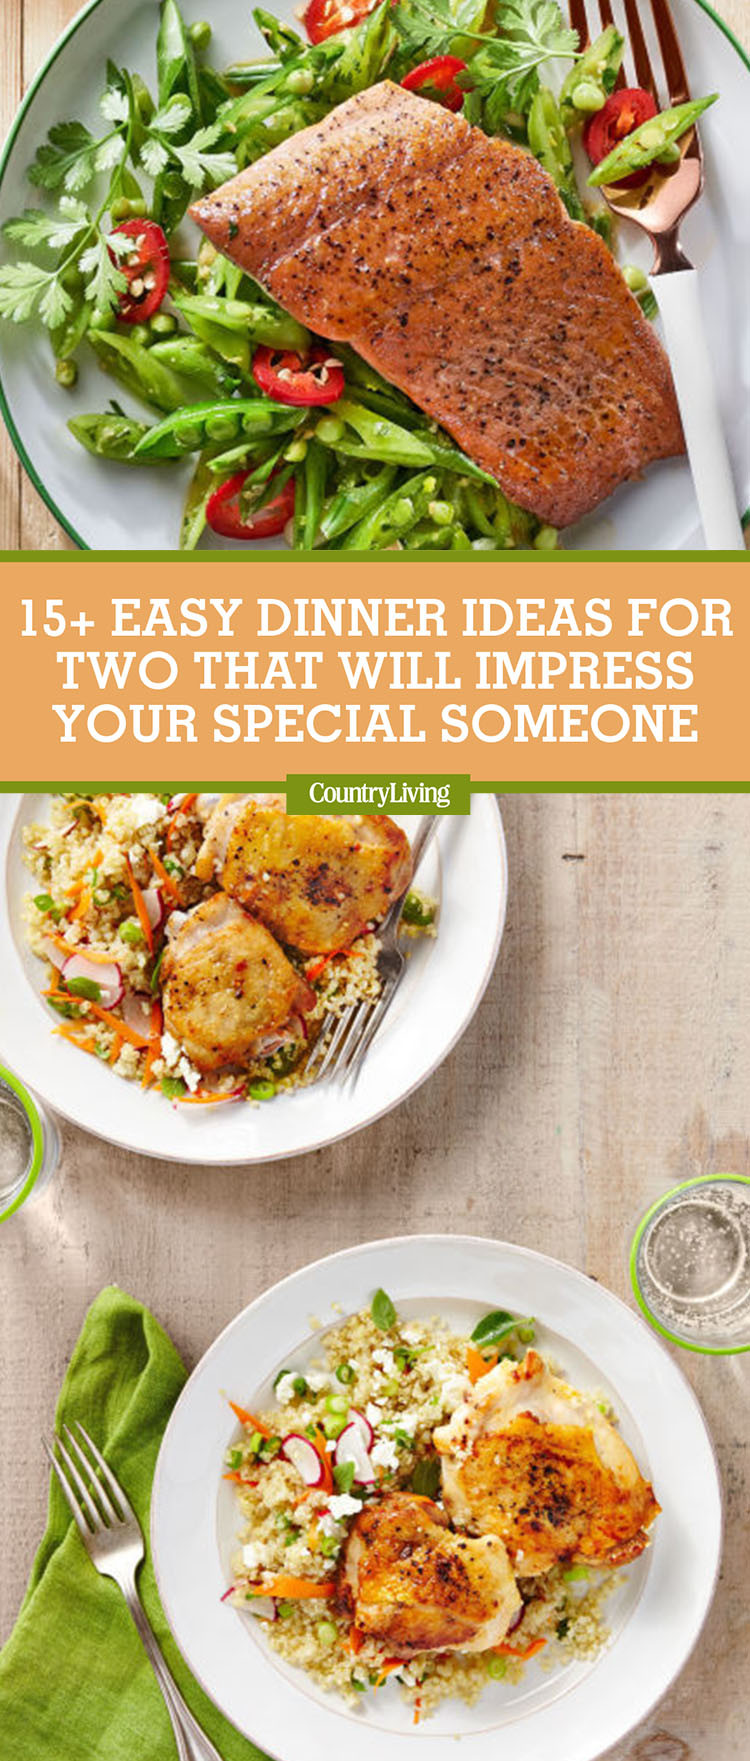 Quick Dinner For Two
 17 Easy Dinner Ideas for Two Romantic Dinner for Two Recipes